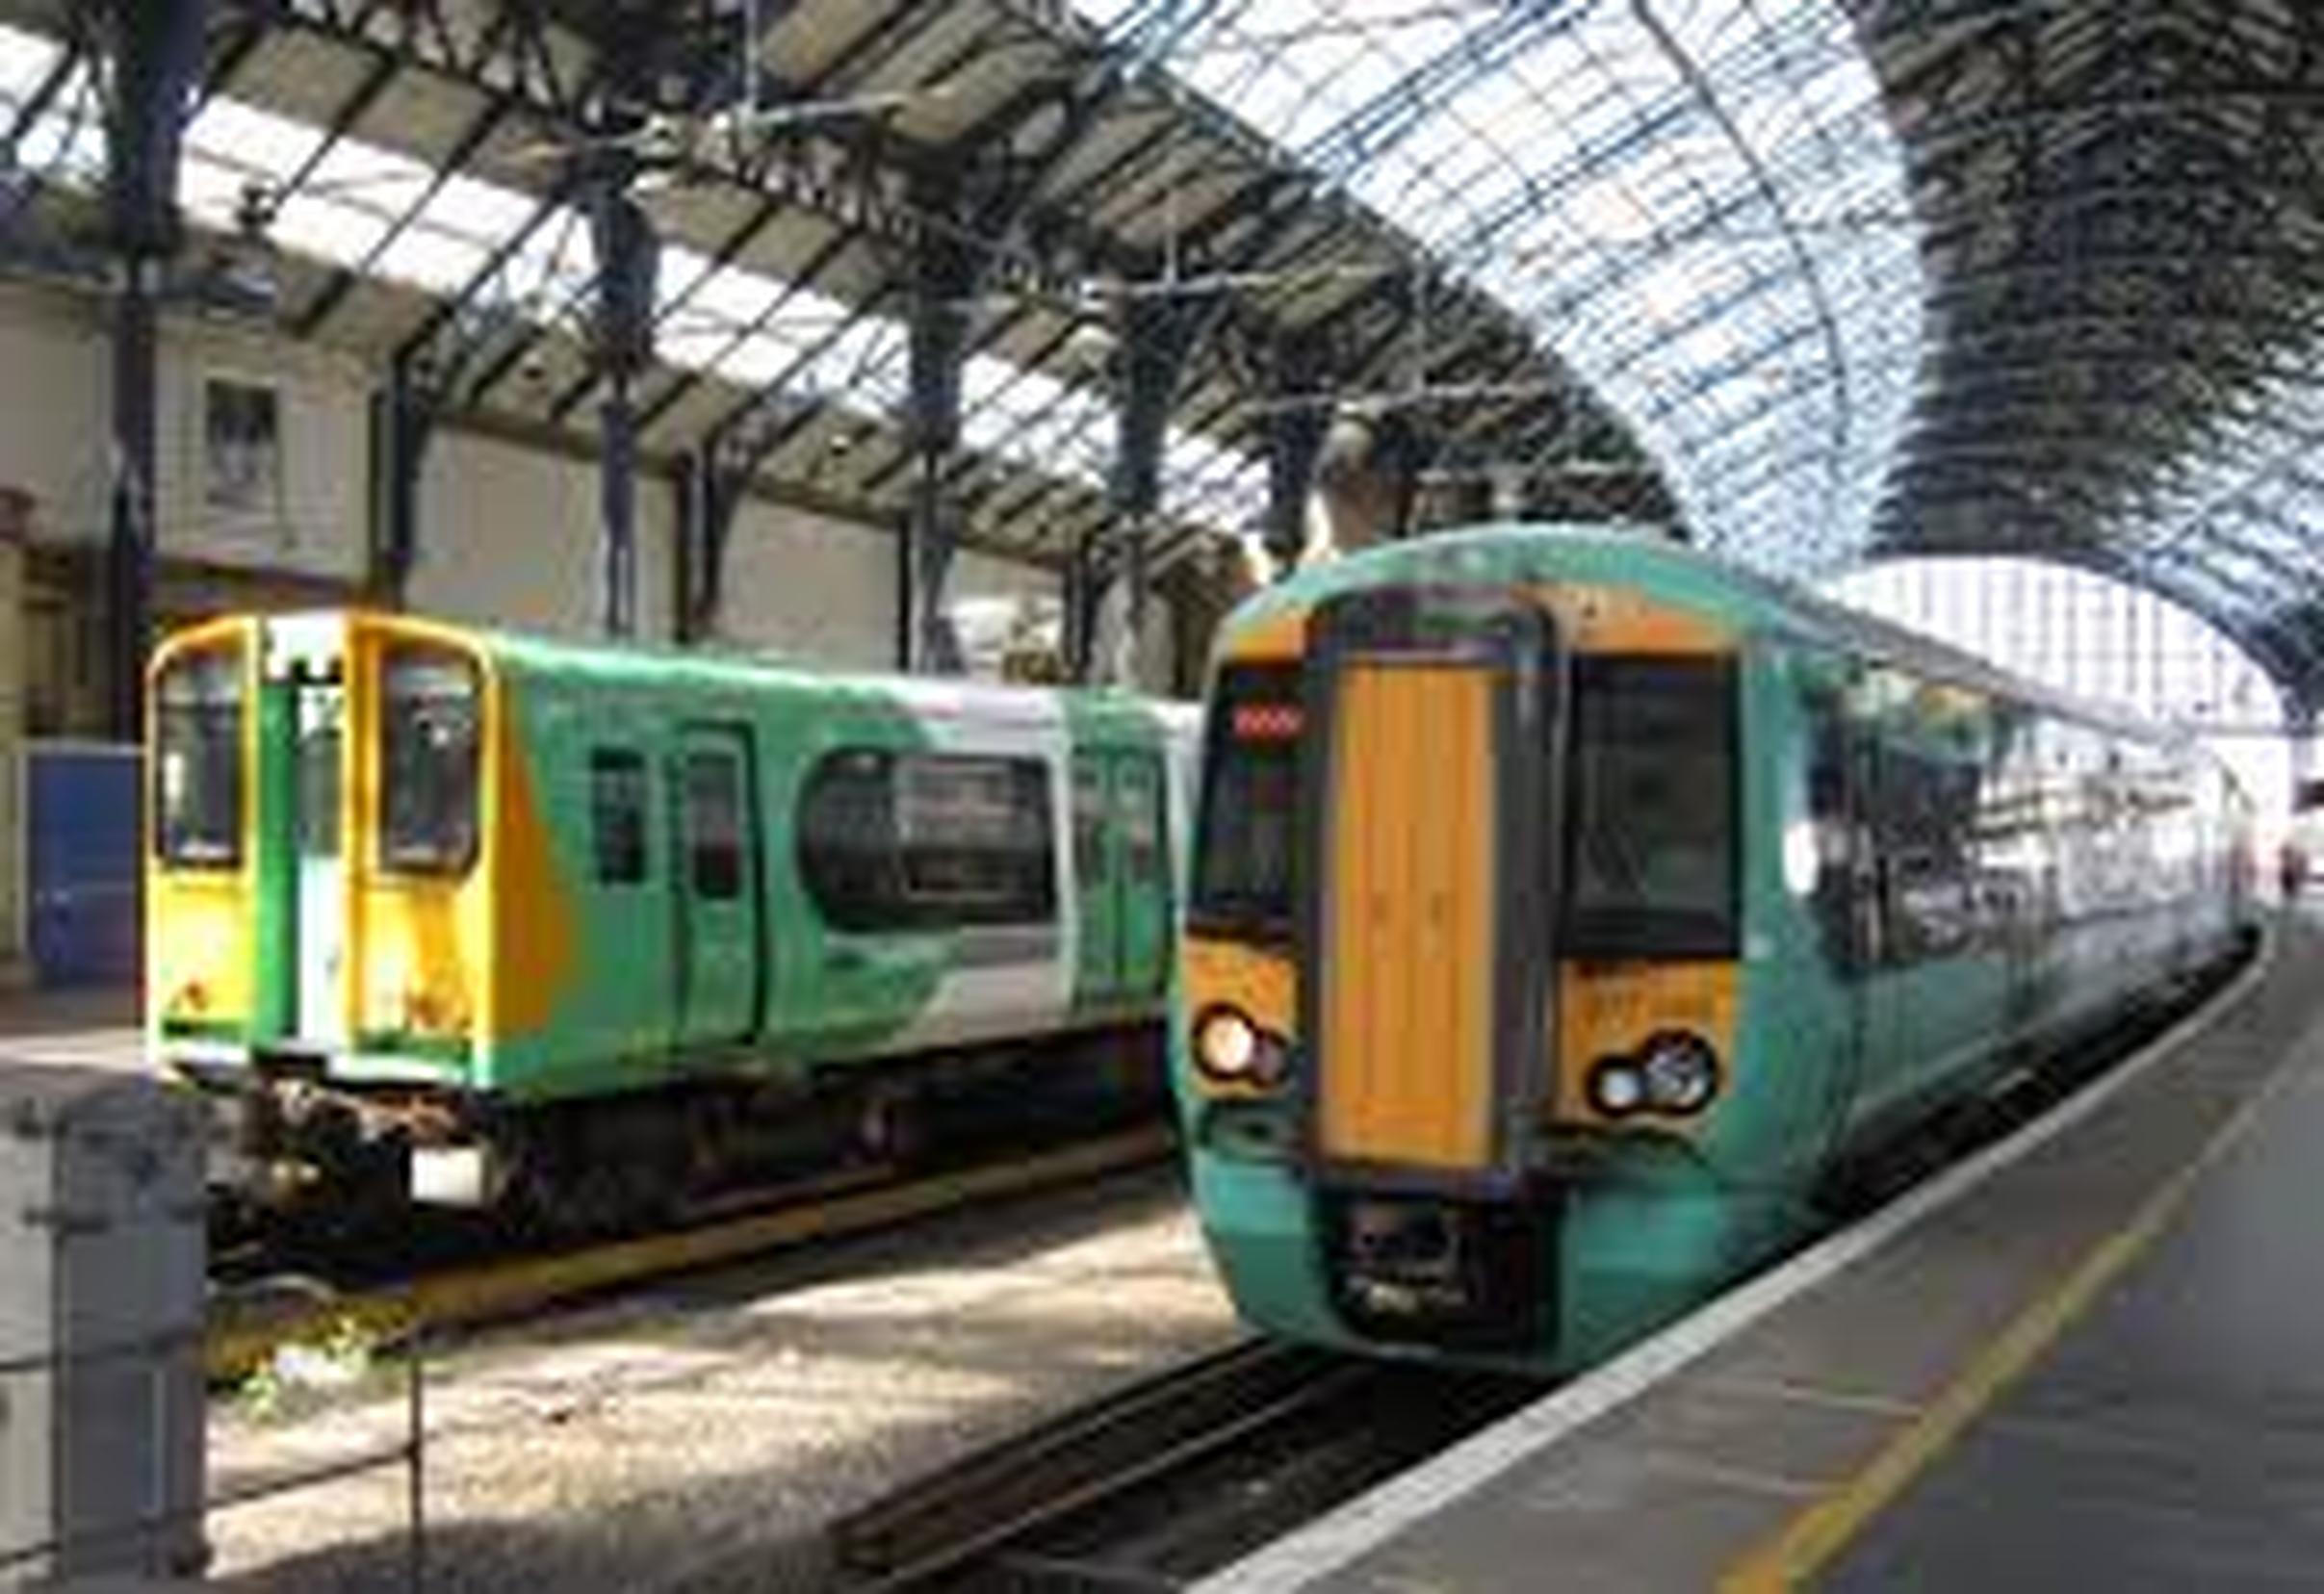 The number of rail services serving routes to the southern coast, Surrey, and west London to be reduced?